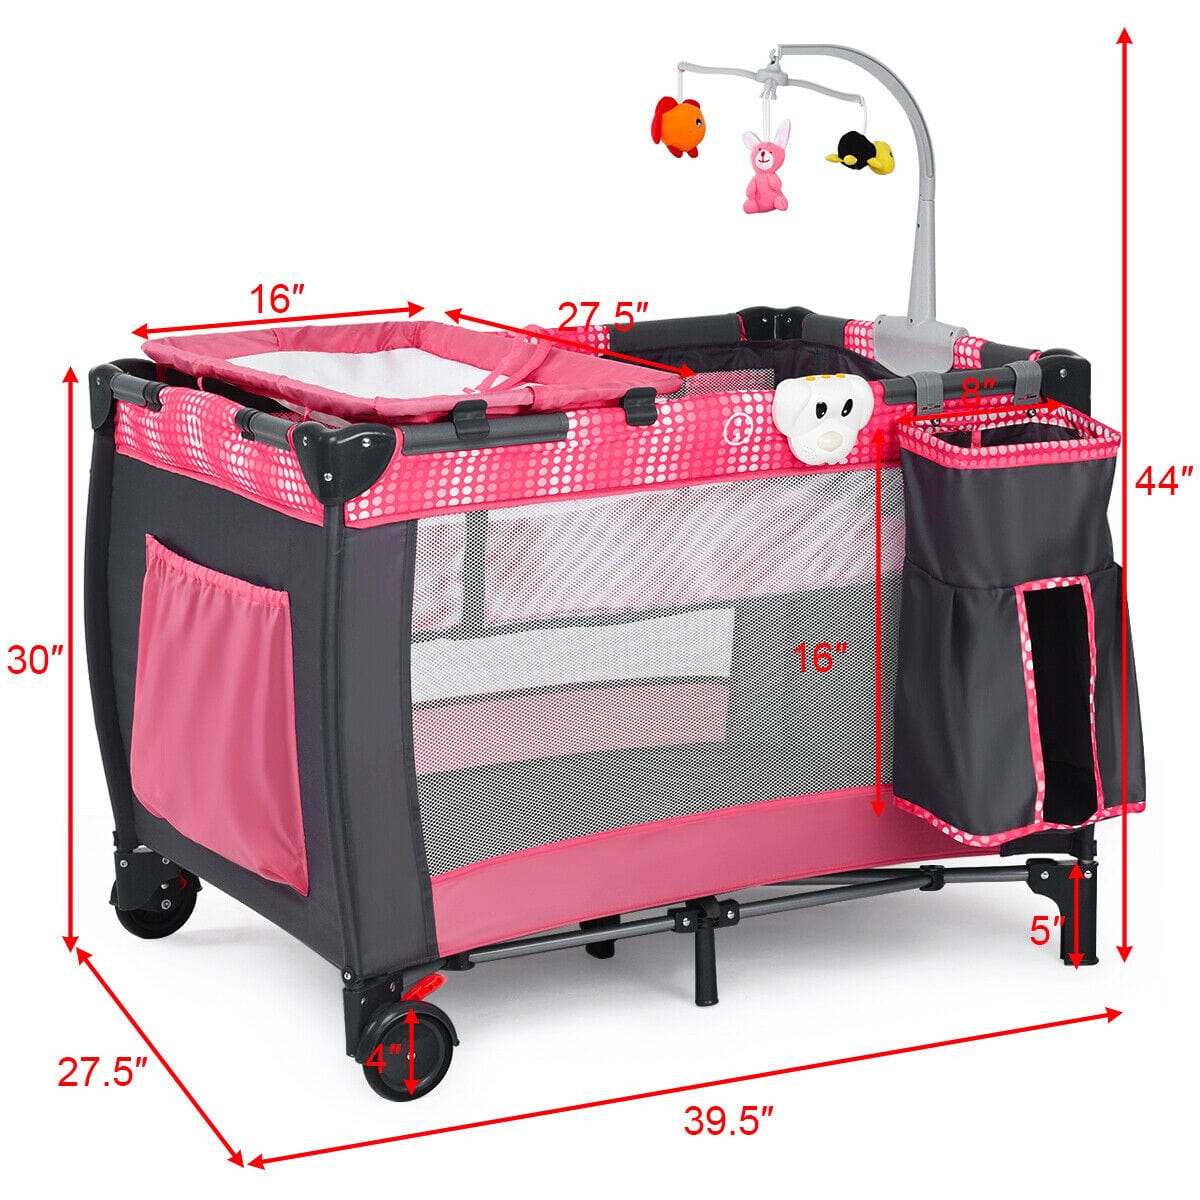 Proactive Baby Foldable Travel Baby Crib Playpen Infant Bassinet Bed Mosquito Net Music w/ Bag